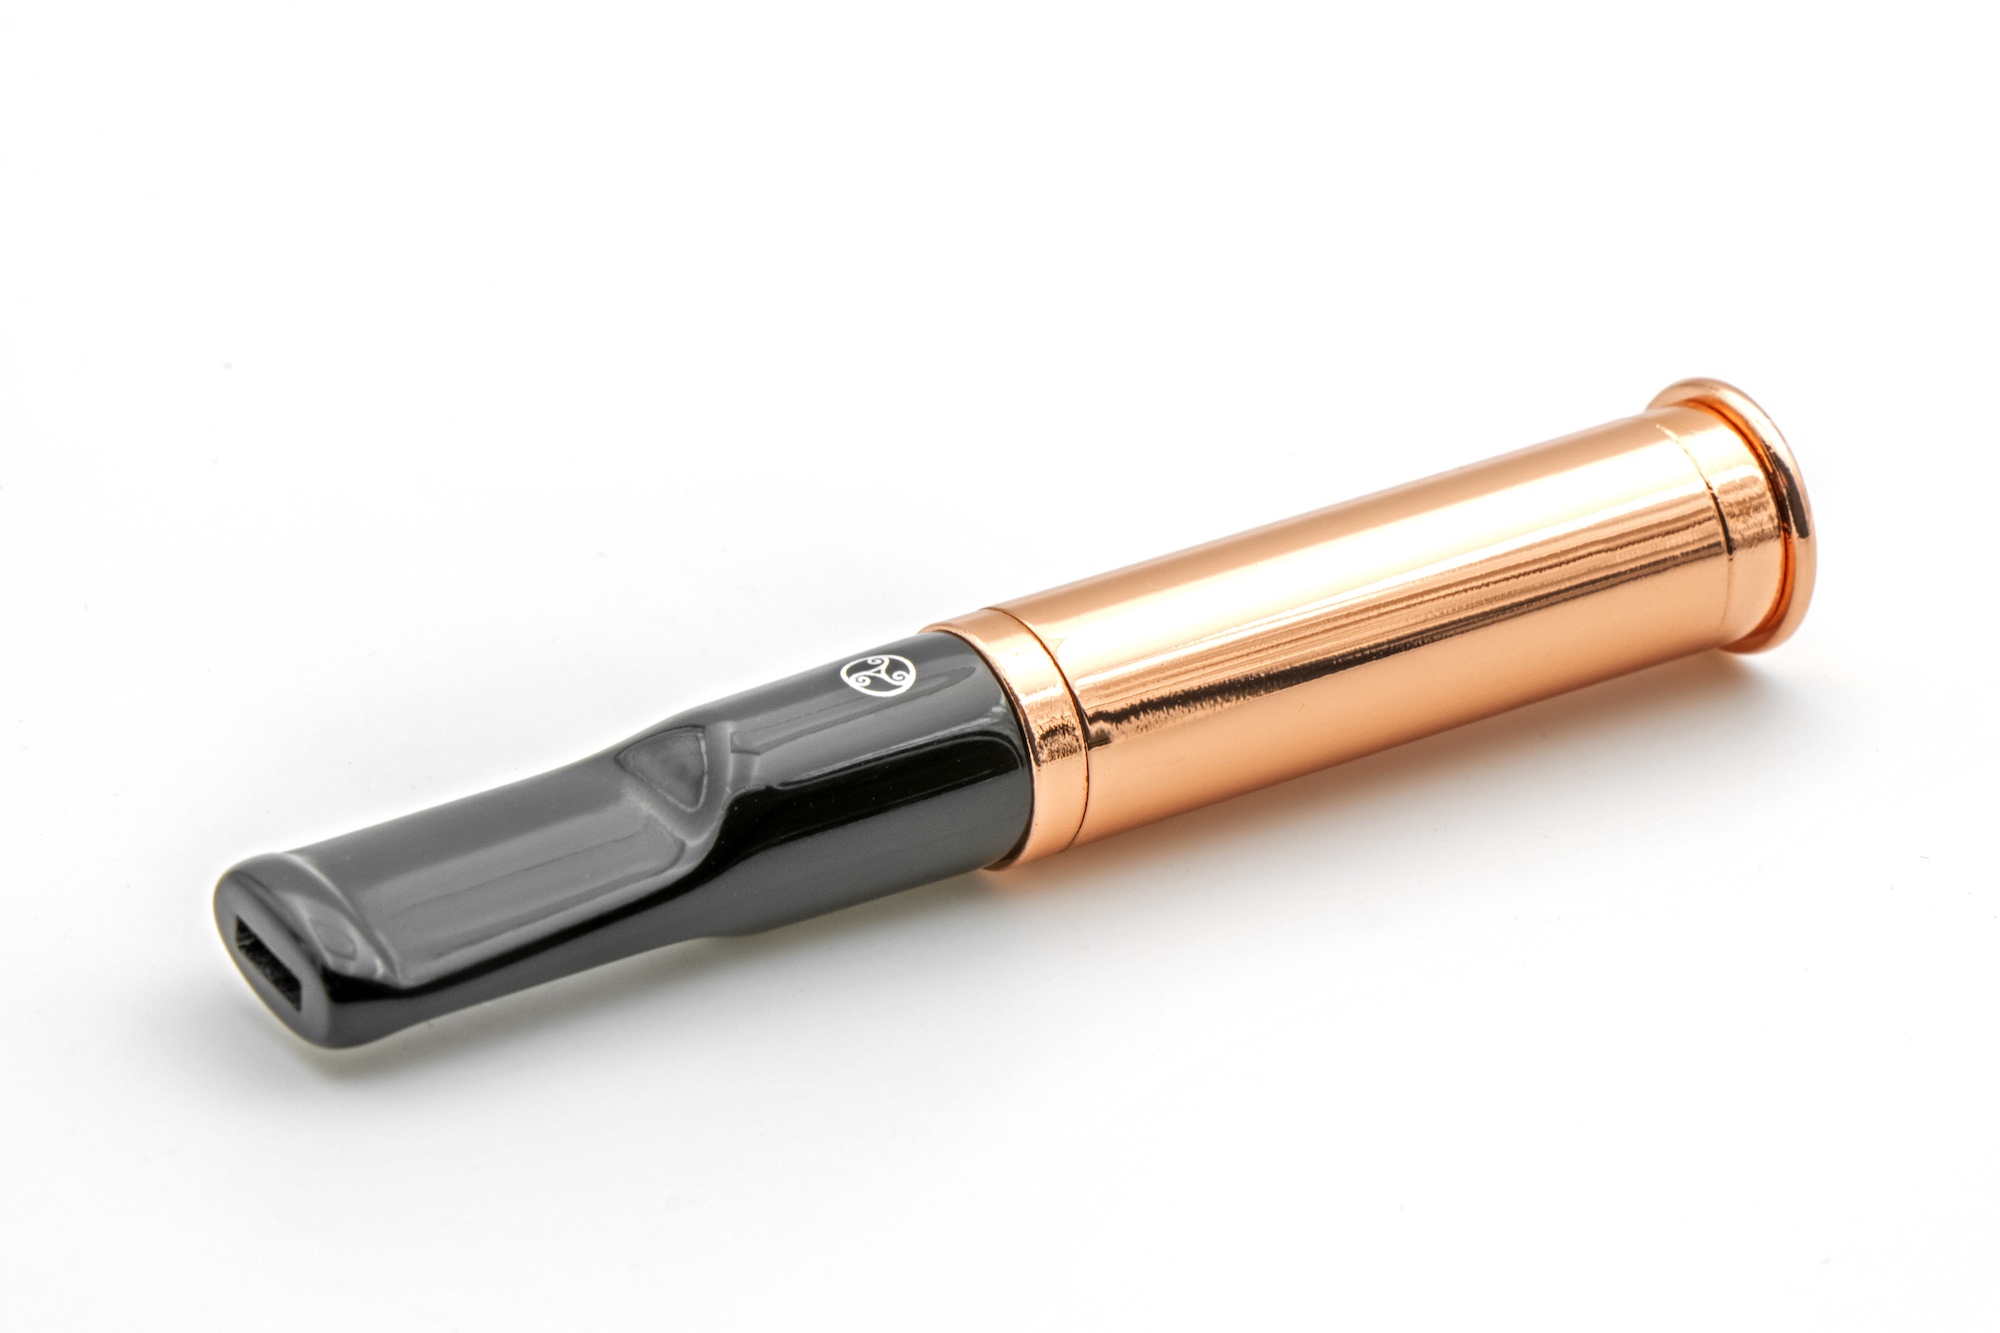 Rattray's Tuby Rose Gold